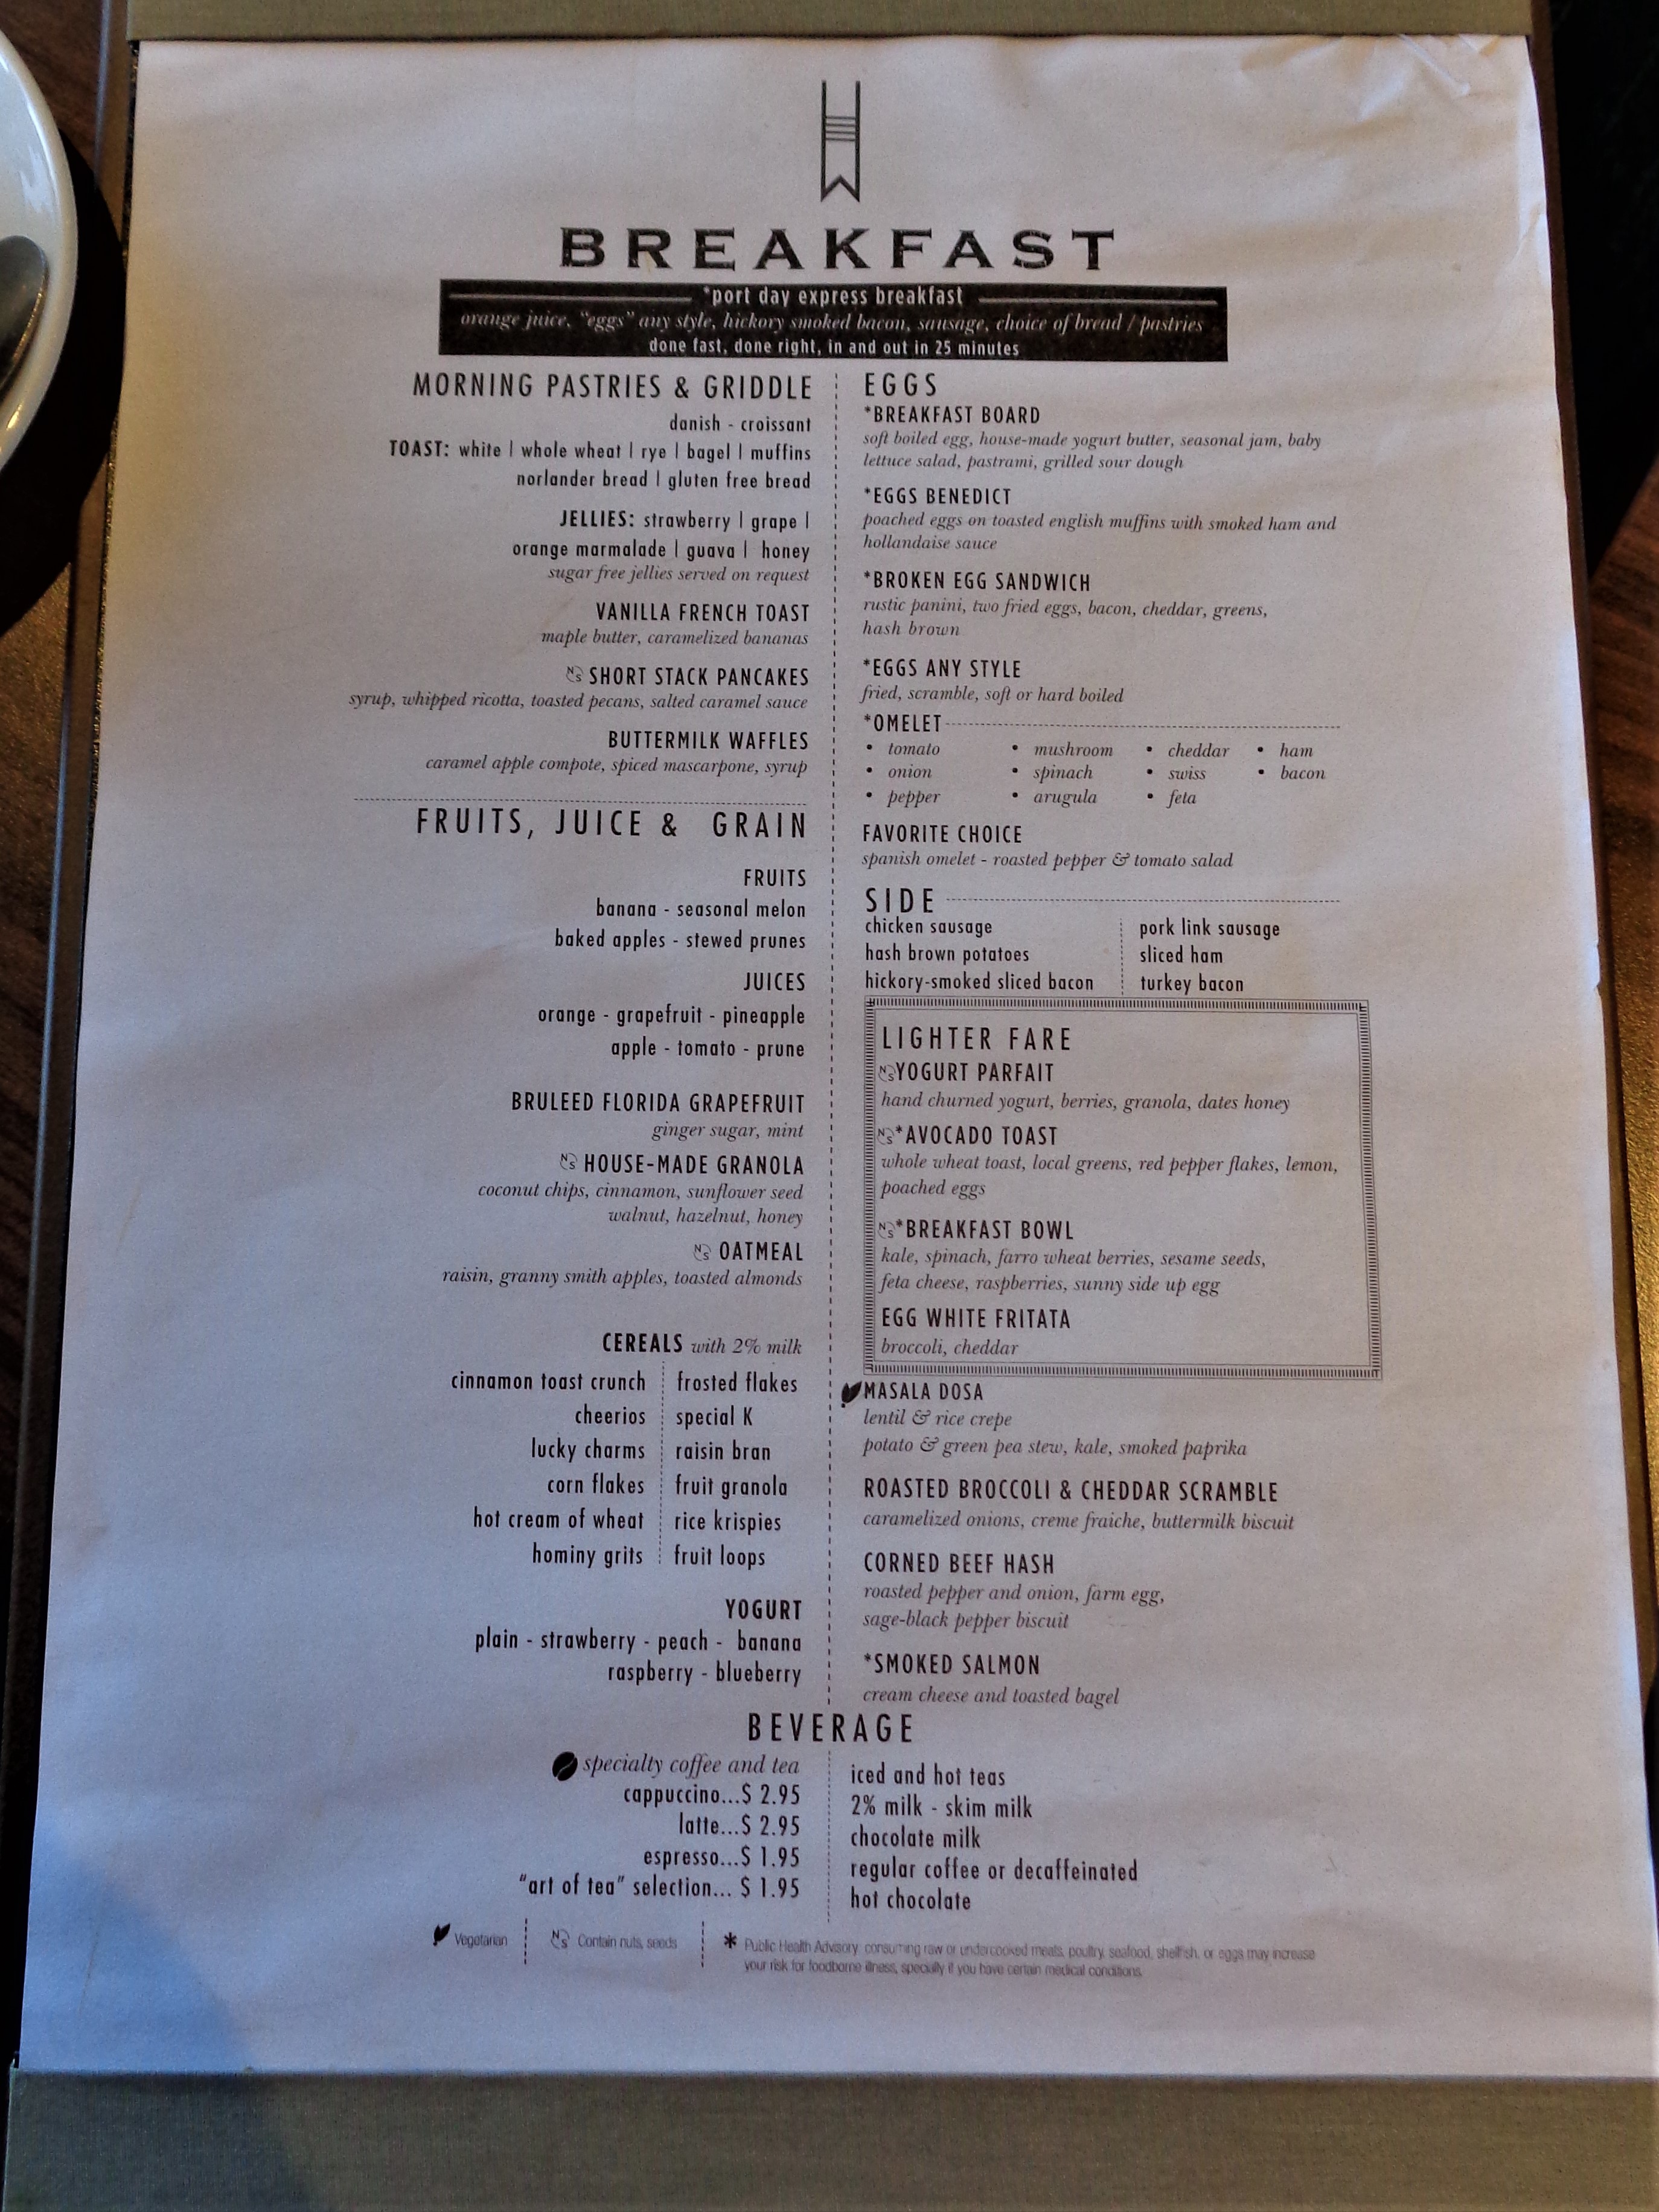 Carnival Cruise Breakfast Choices